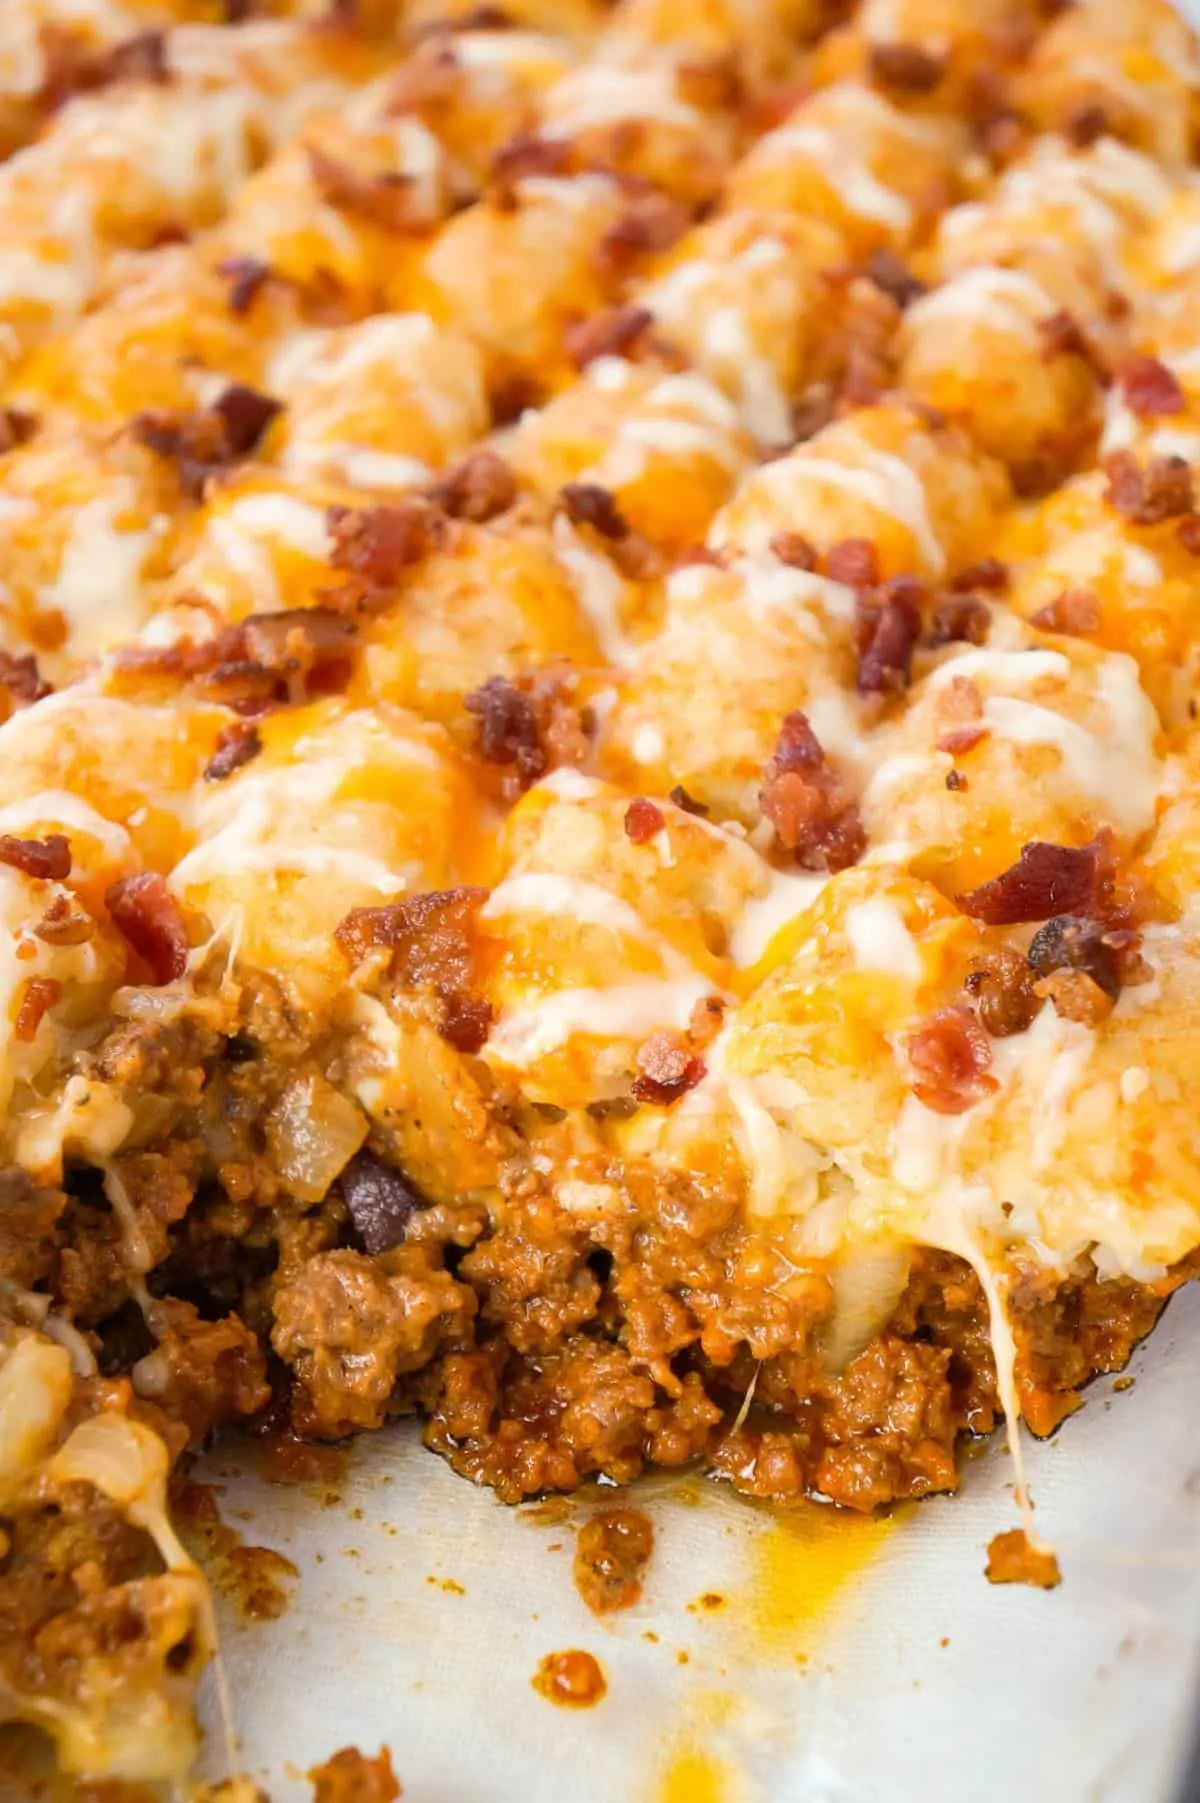 Bacon Cheeseburger Tater Tot Casserole is an easy ground beef dinner recipe loaded with crumbled bacon and cheese, and topped with crispy tater tots.